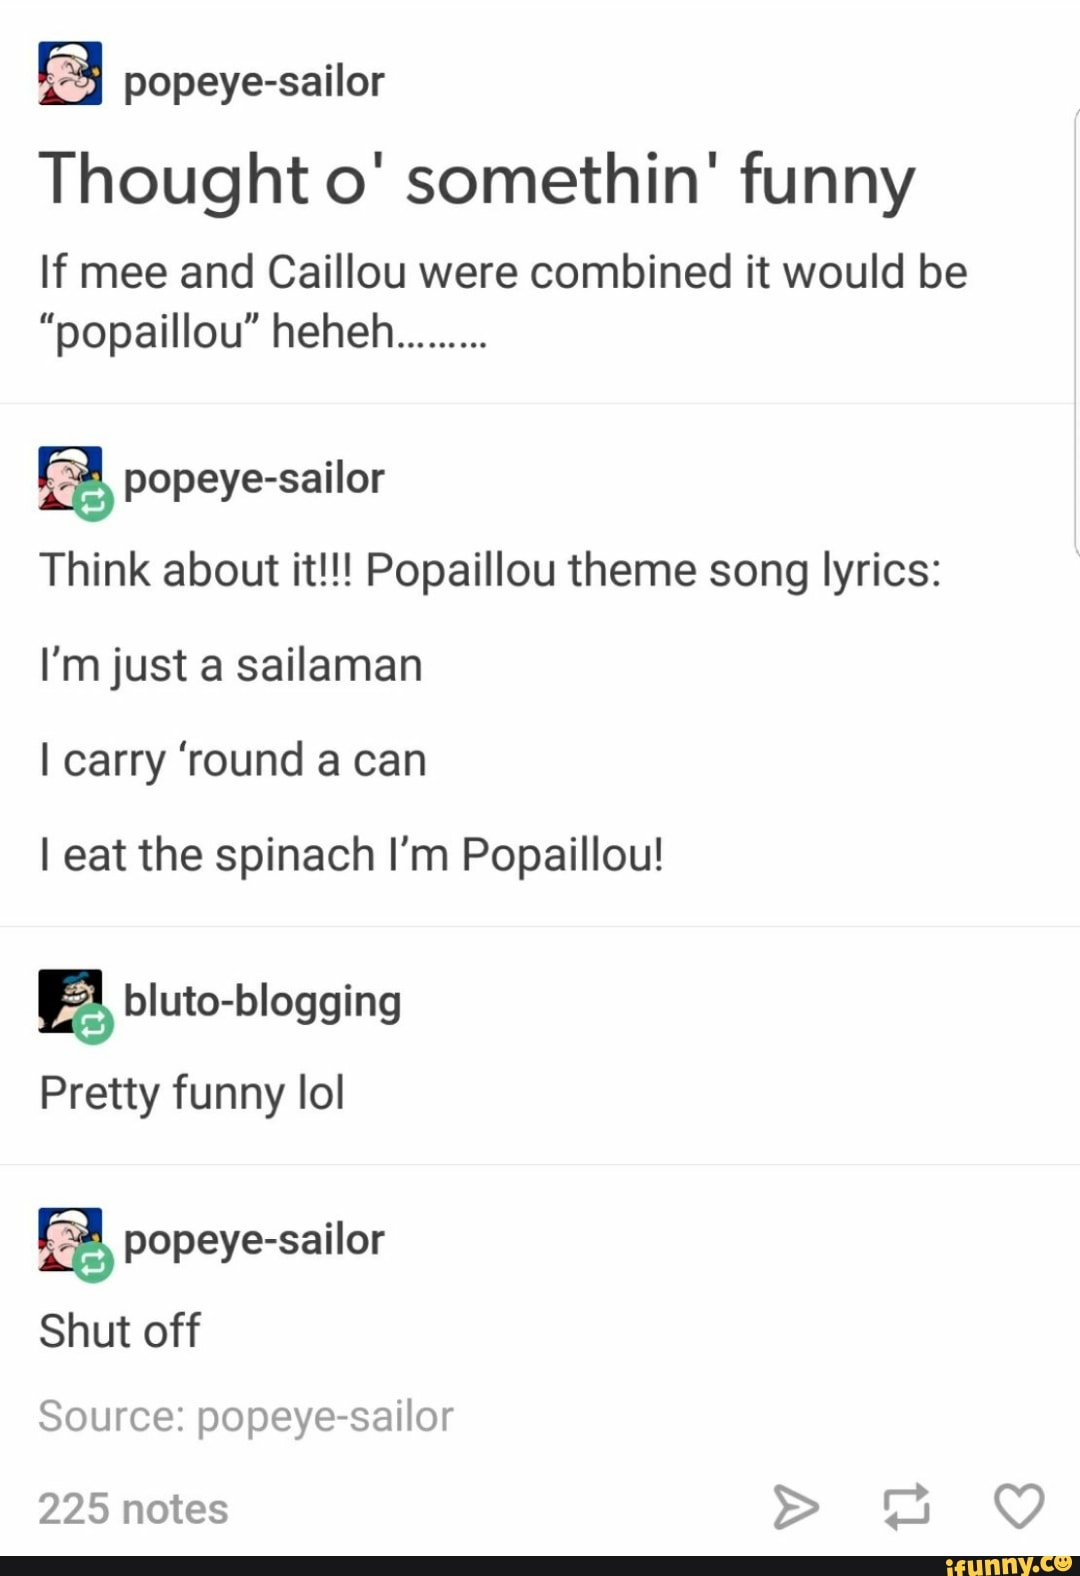 Popeye Sailor Thought O Somethin Funny If Mee And Caillou Were Combined It Would Be Popaillou Heheh Popeye Sailor Think About It Popaillou Theme Song Lyrics I Mjust A Sailaman I Carry Round A - roblox id code caillou memes